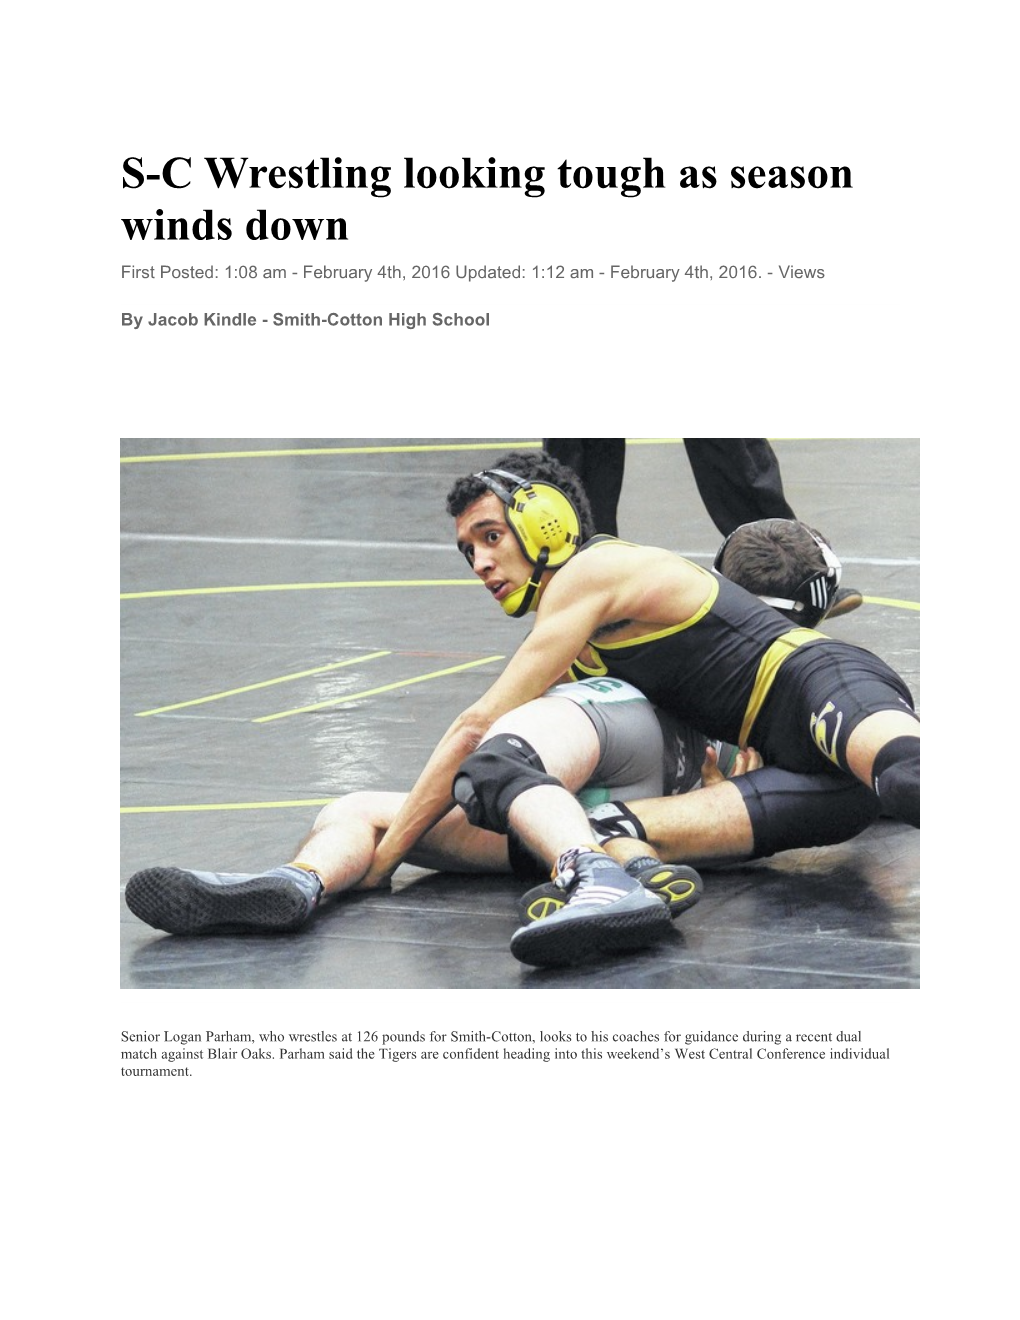 S-C Wrestling Looking Tough As Season Winds Down